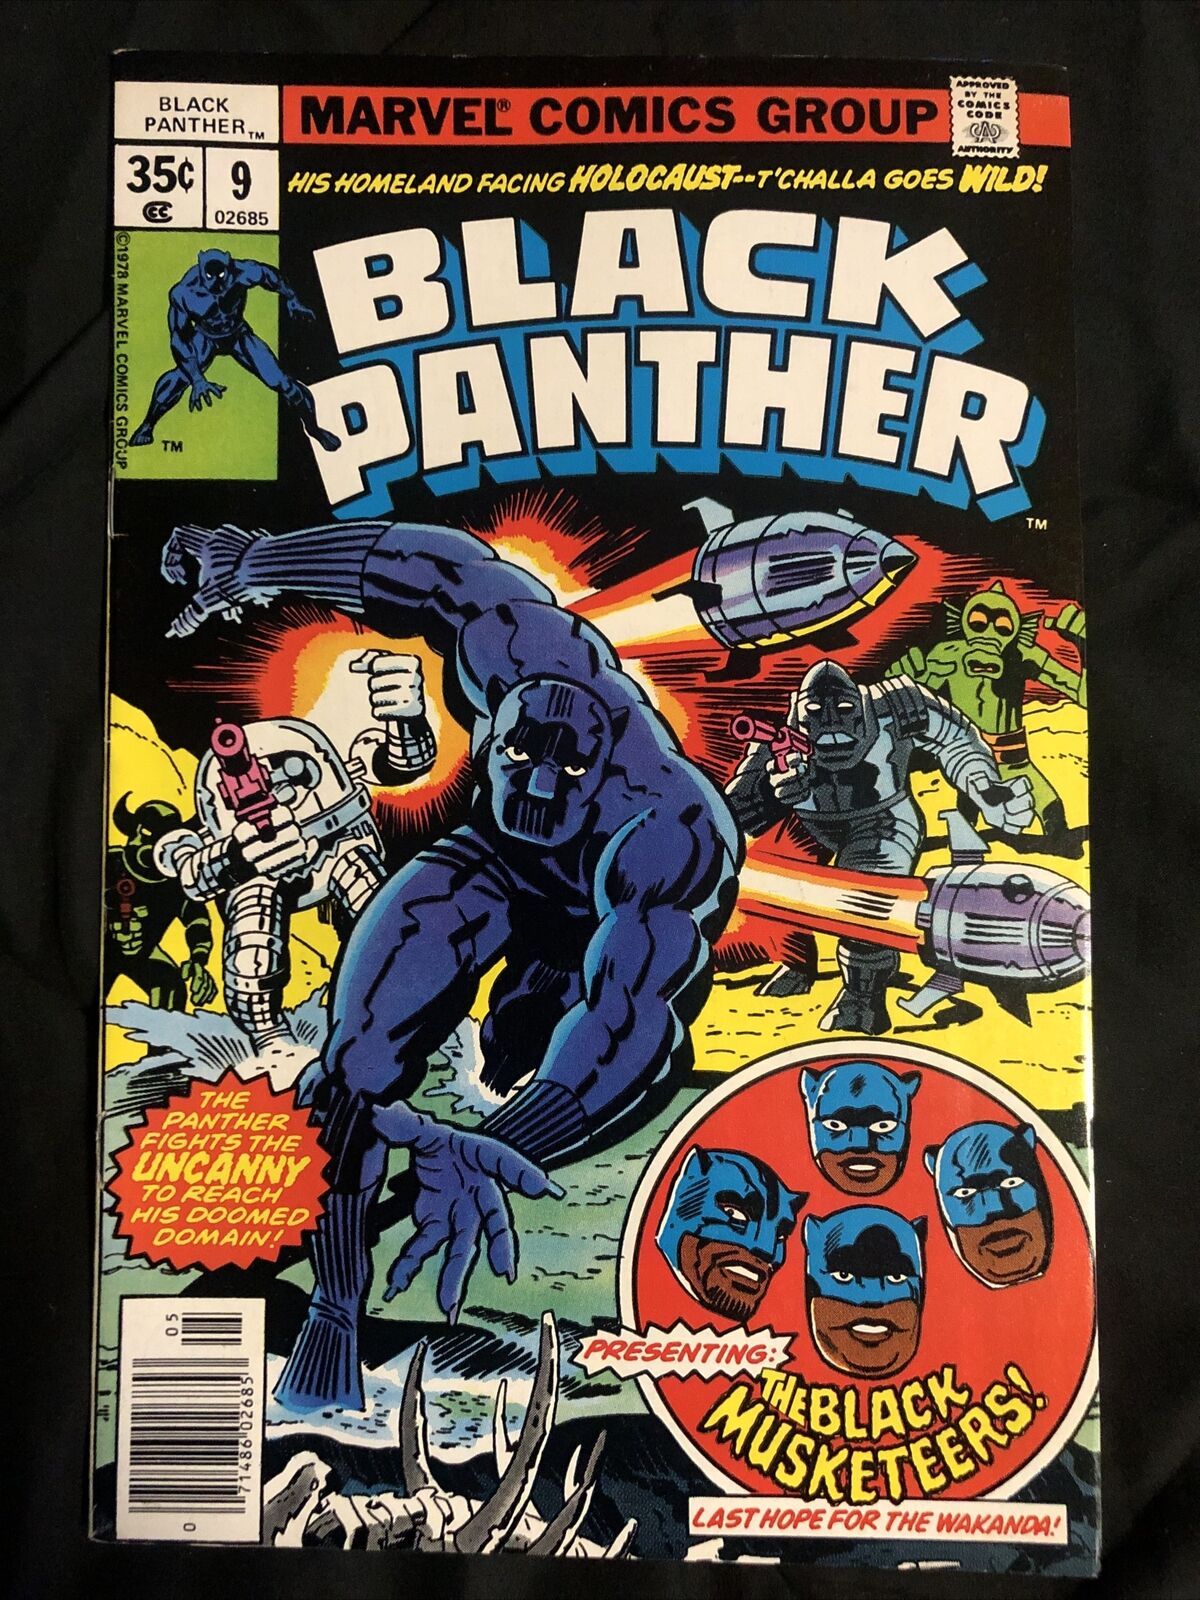 Black Panther #9 Marvel Comics 1978 The Black Musketeers App Newstand Edition